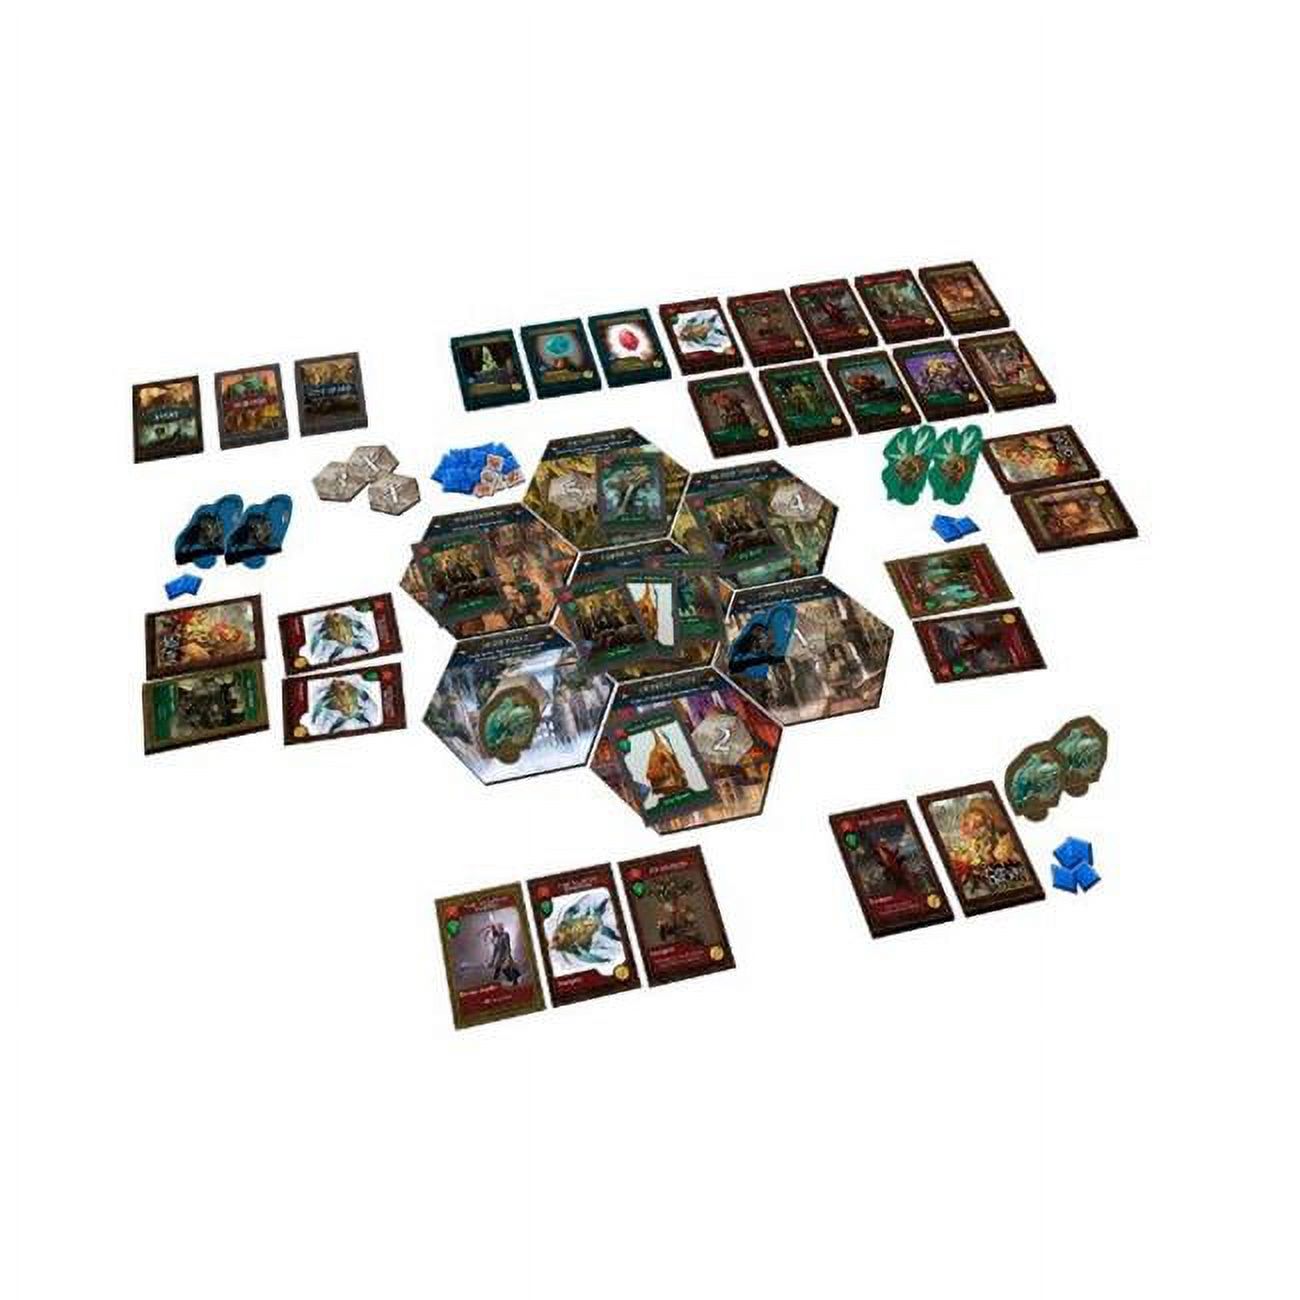 Gateway Uprising Magic Fantasy Strategy Interactive Board Game CMON CMNGTW001 - image 1 of 4